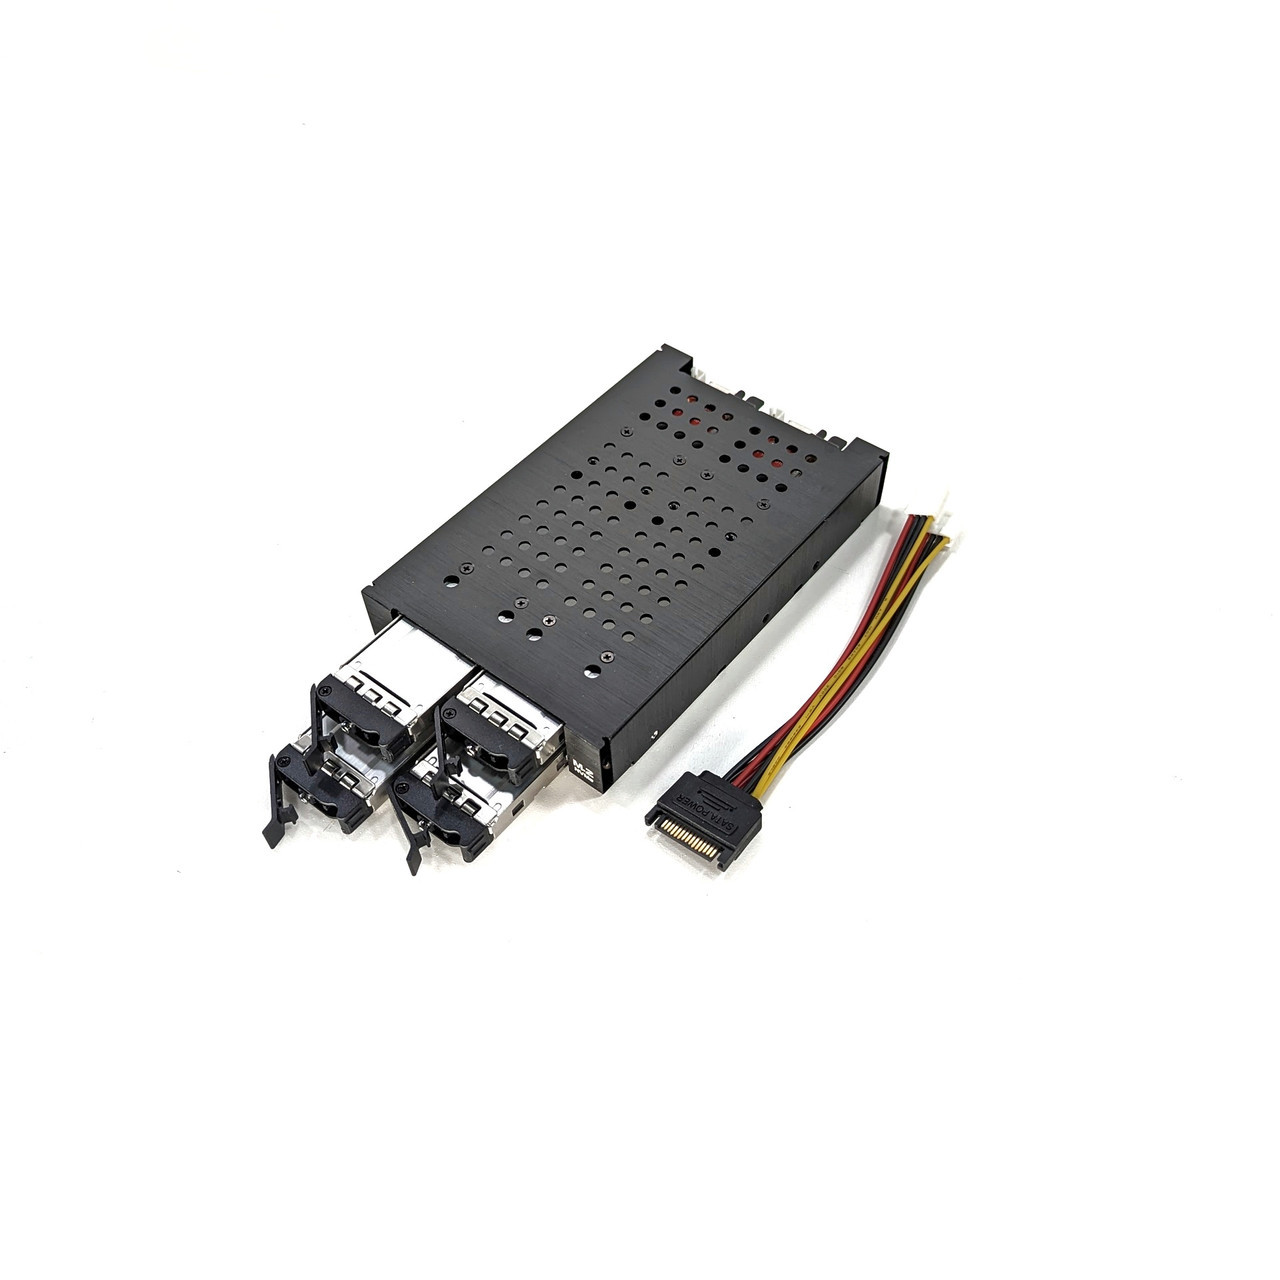 4 Bay M.2 NVMe SSD Backplane Cage with OCulink Port (SFF-8611)